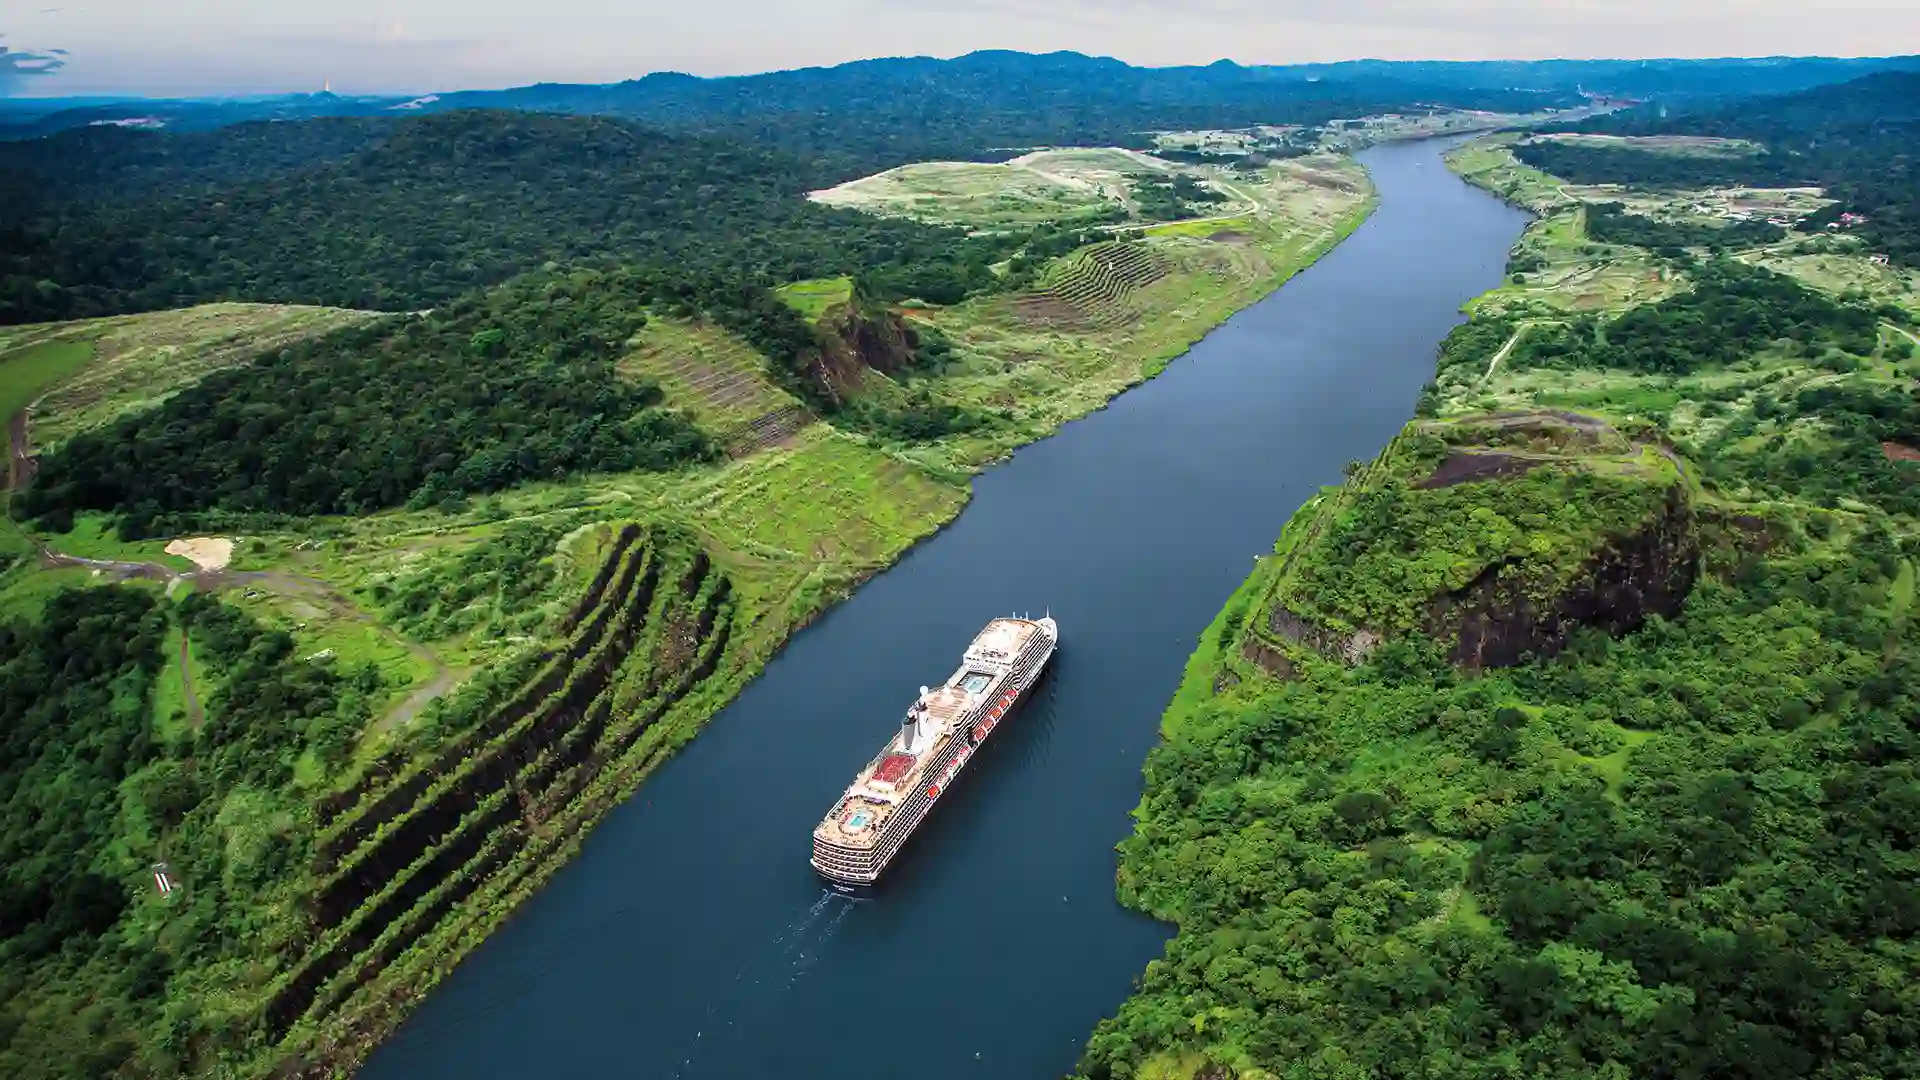 View of Holland America Line cruise ship sailing through Panama Canal.